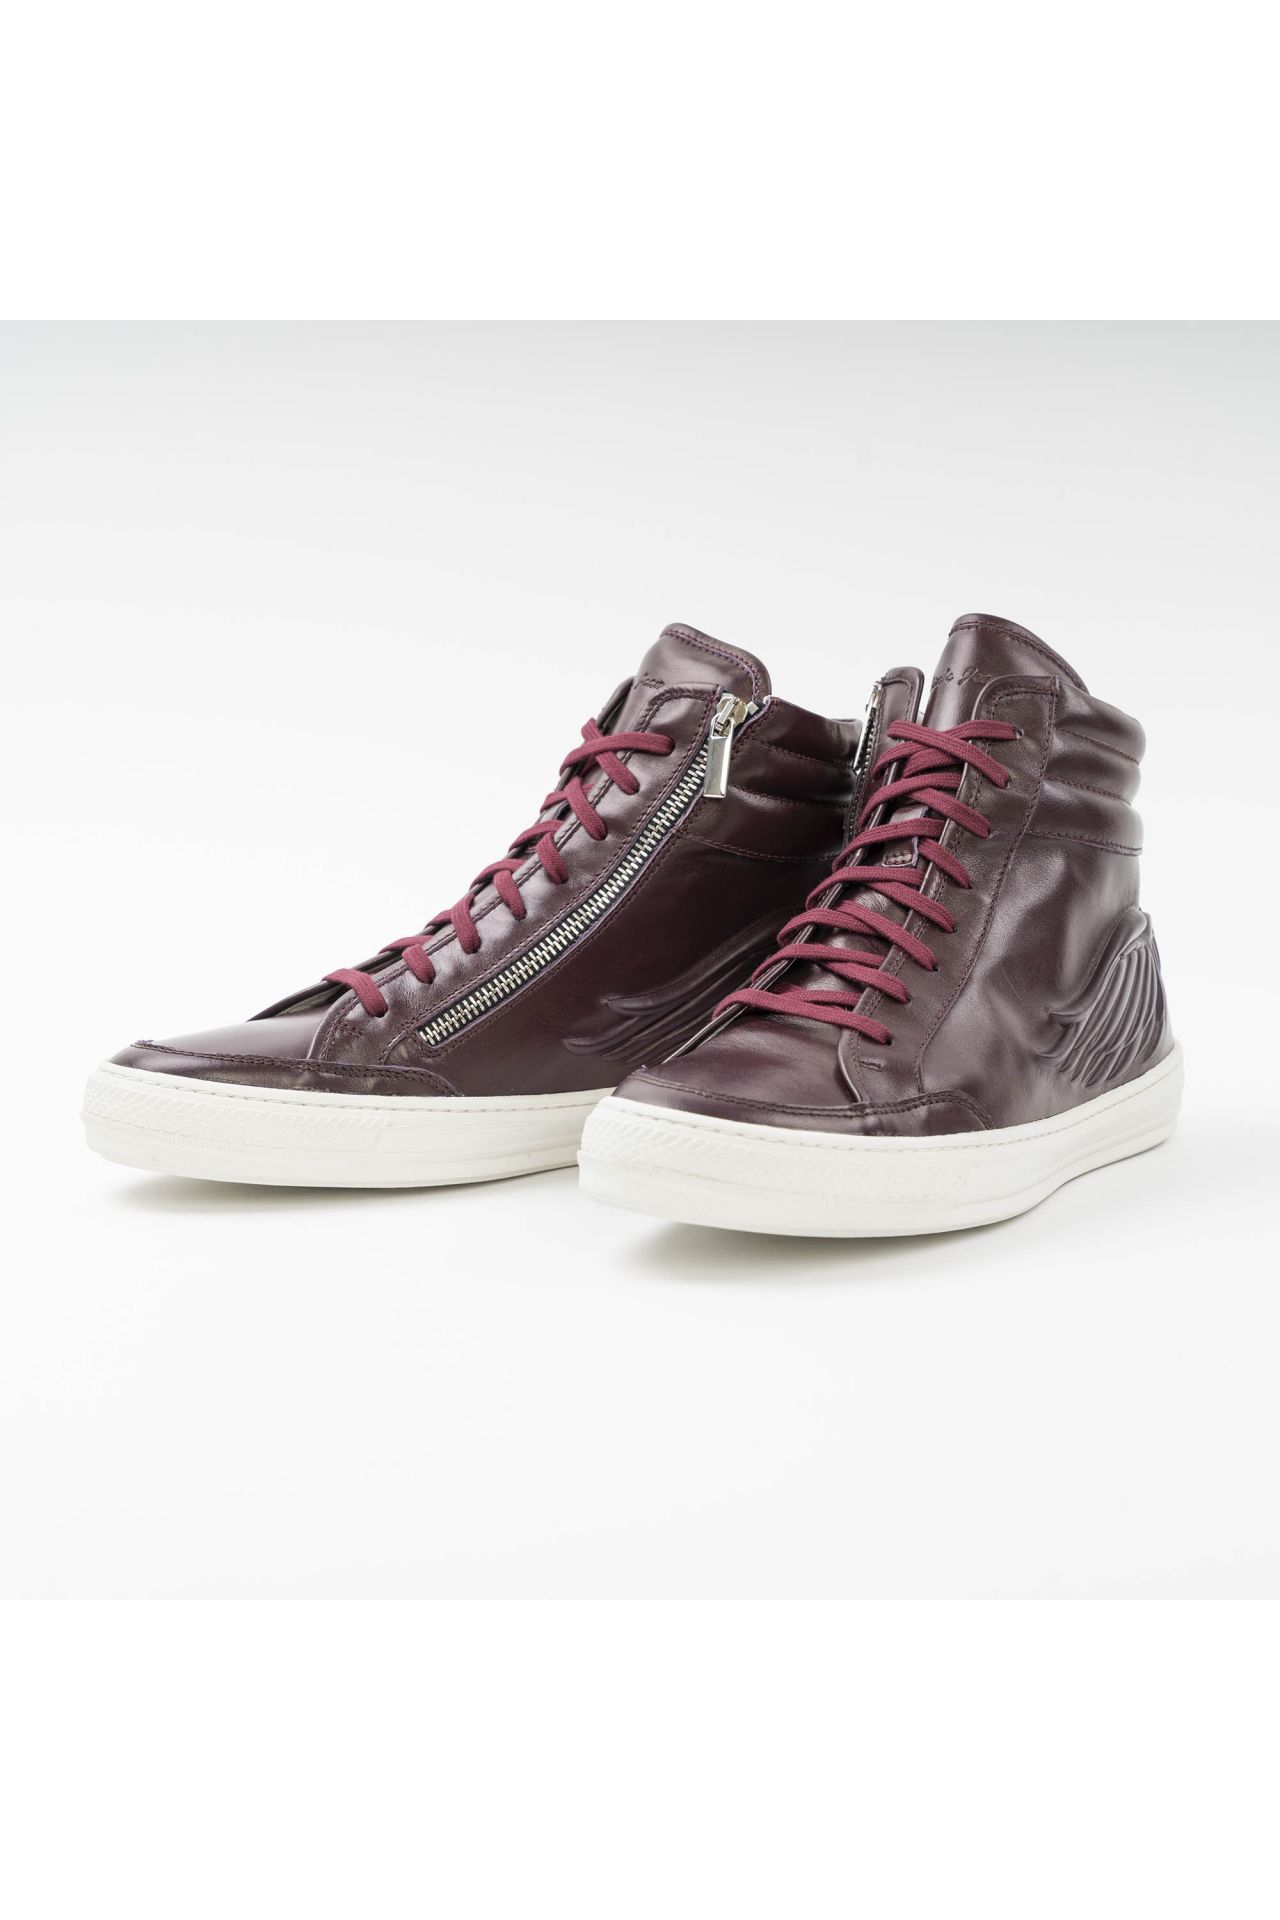 MENS HIGH TOP LAMINATED LEATHER SNEAKERS IN BURGUNDY